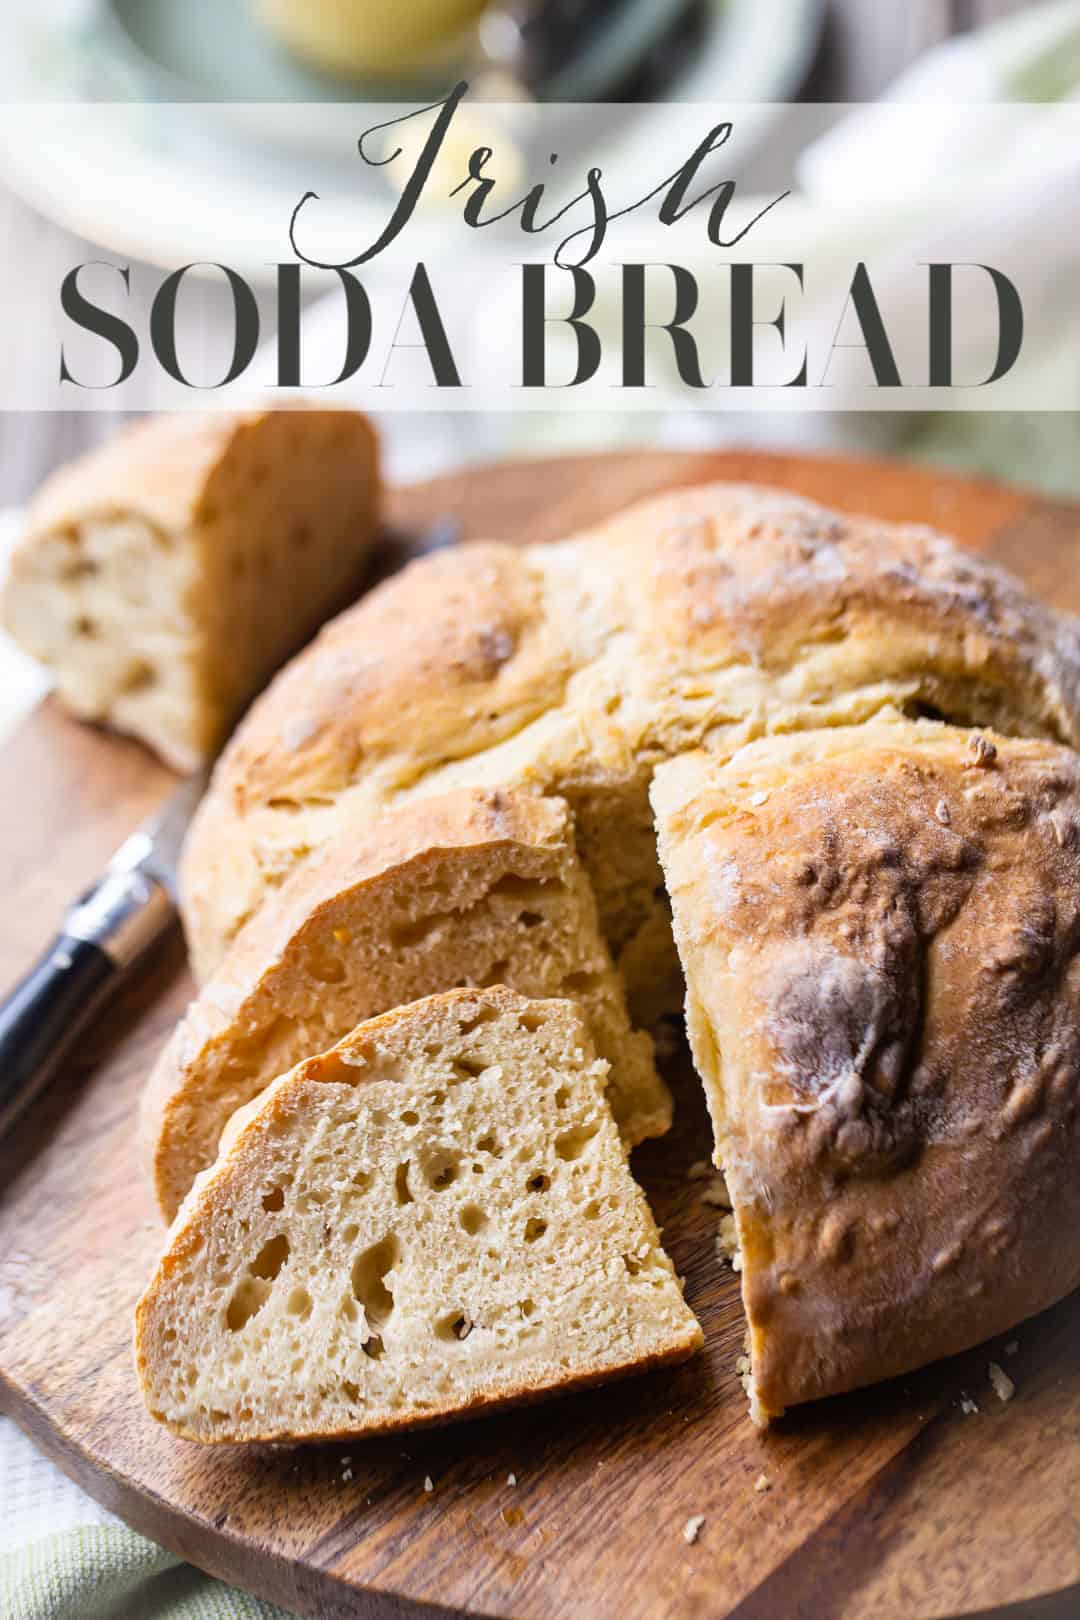 Soda bread sliced and served with butter on a wooden board, with a text overlay above that reads "Irish Soda Bread."